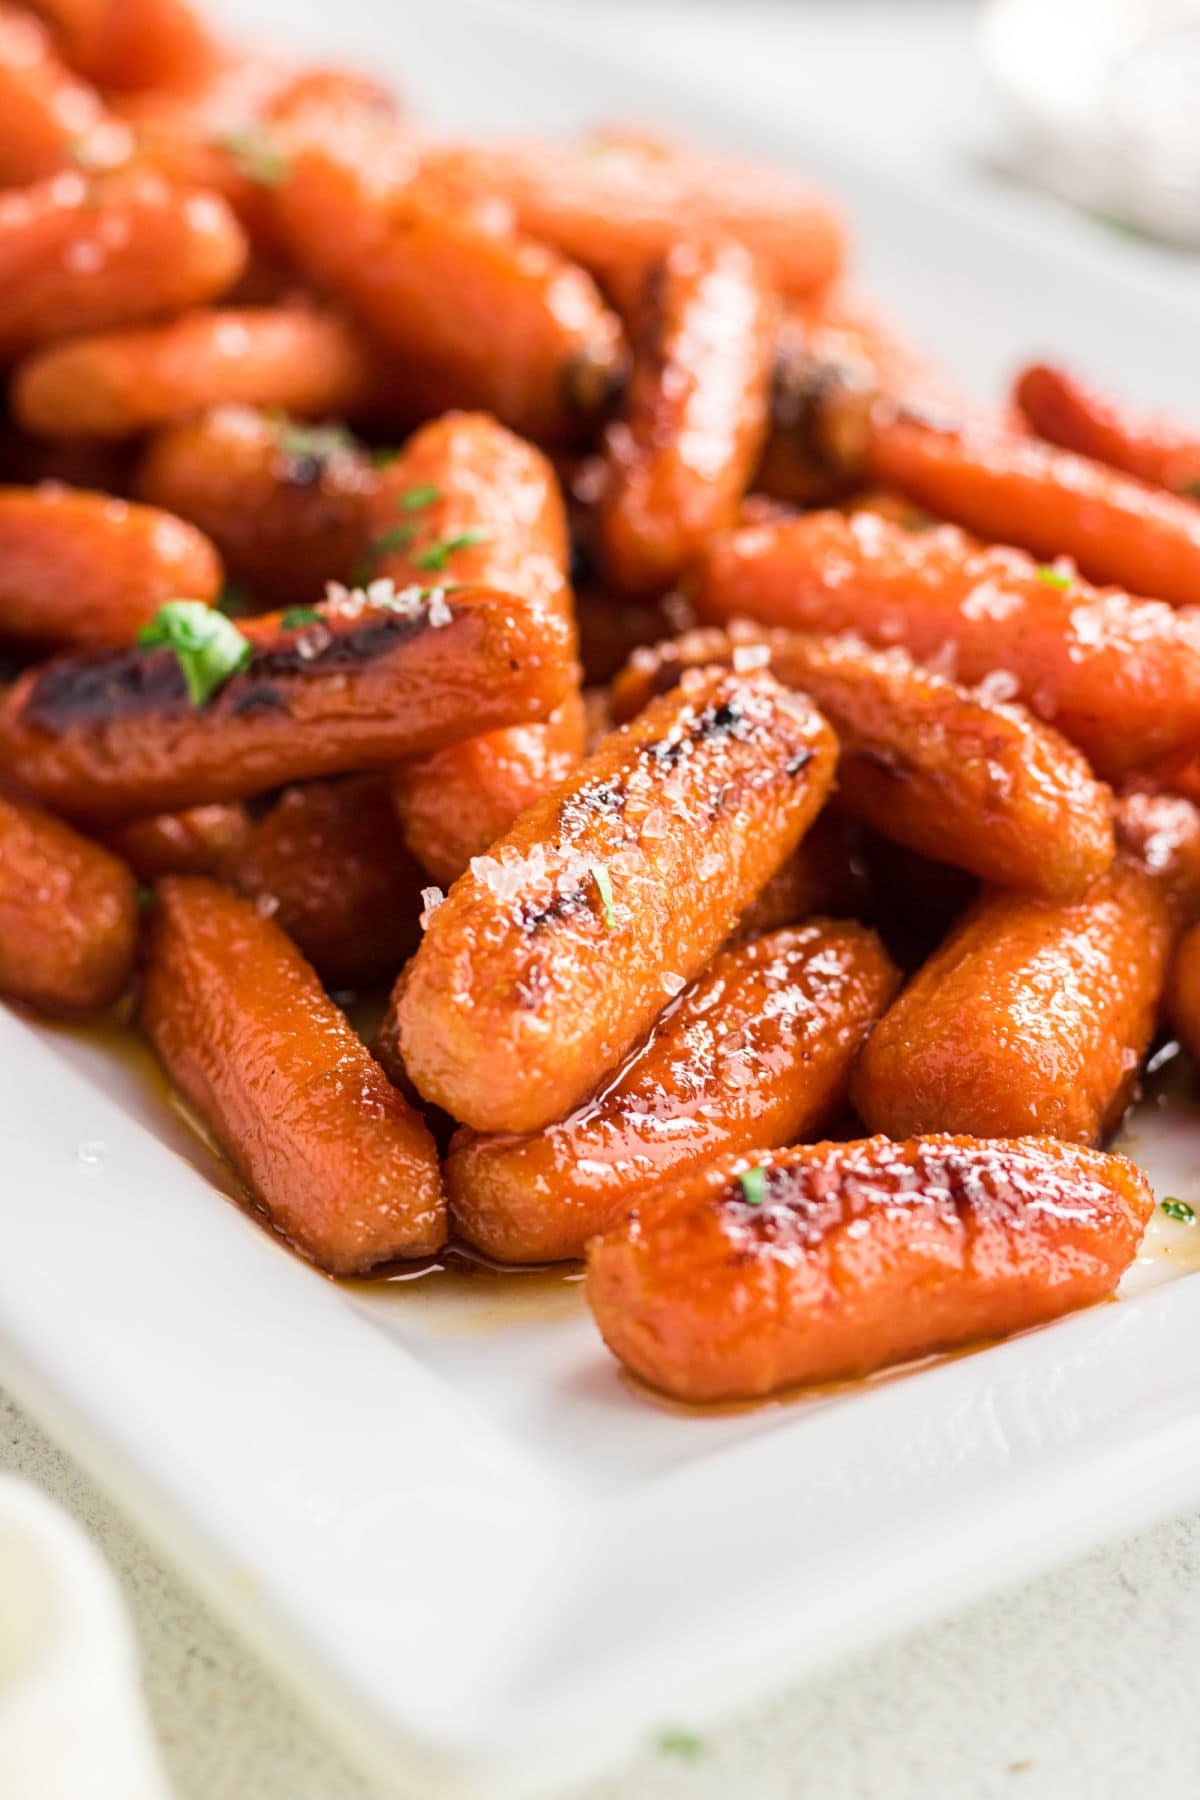 Close up of the caramelization on the carrots.